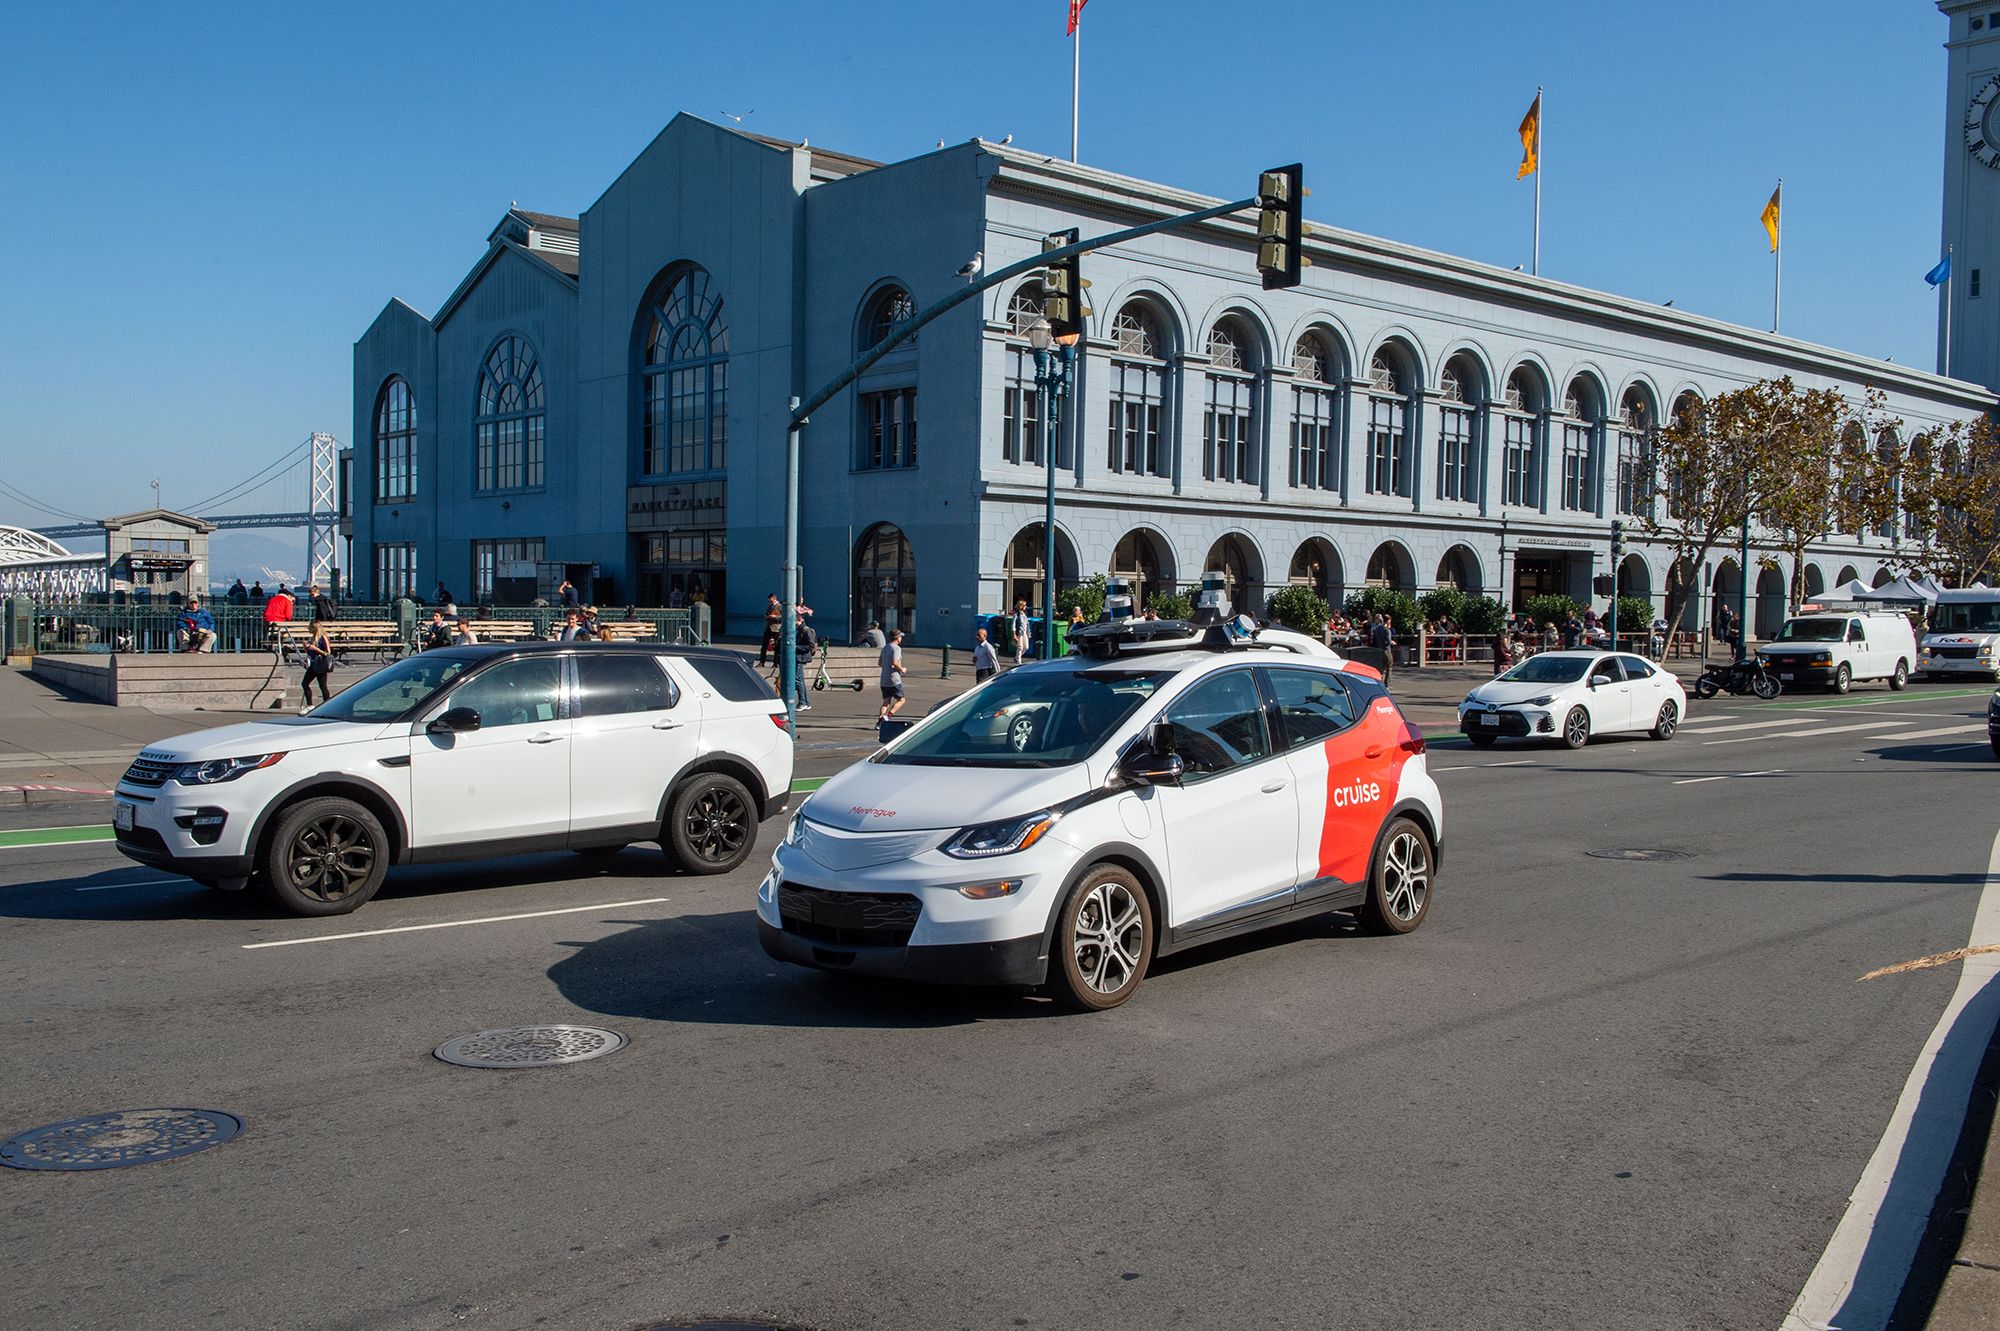 The San Francisco Giants will be sponsored by Cruise, an autonomous vehicle  company under investigation for safety concerns - McCovey Chronicles